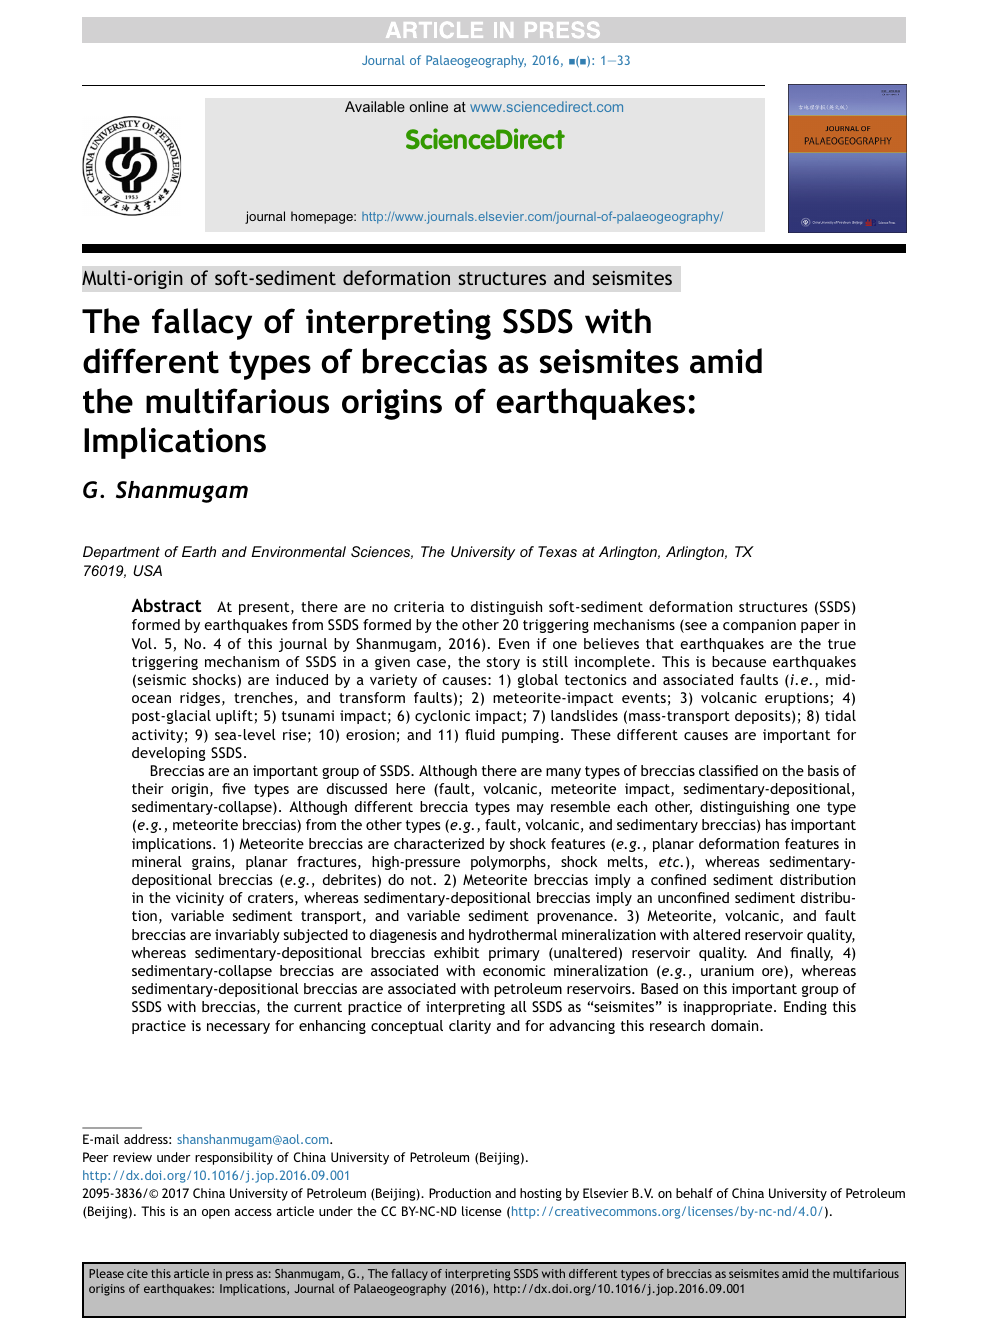 The Fallacy Of Interpreting Ssds With Different Types Of Breccias As Seismites Amid The Multifarious Origins Of Earthquakes Implications Topic Of Research Paper In Earth And Related Environmental Sciences Download Scholarly